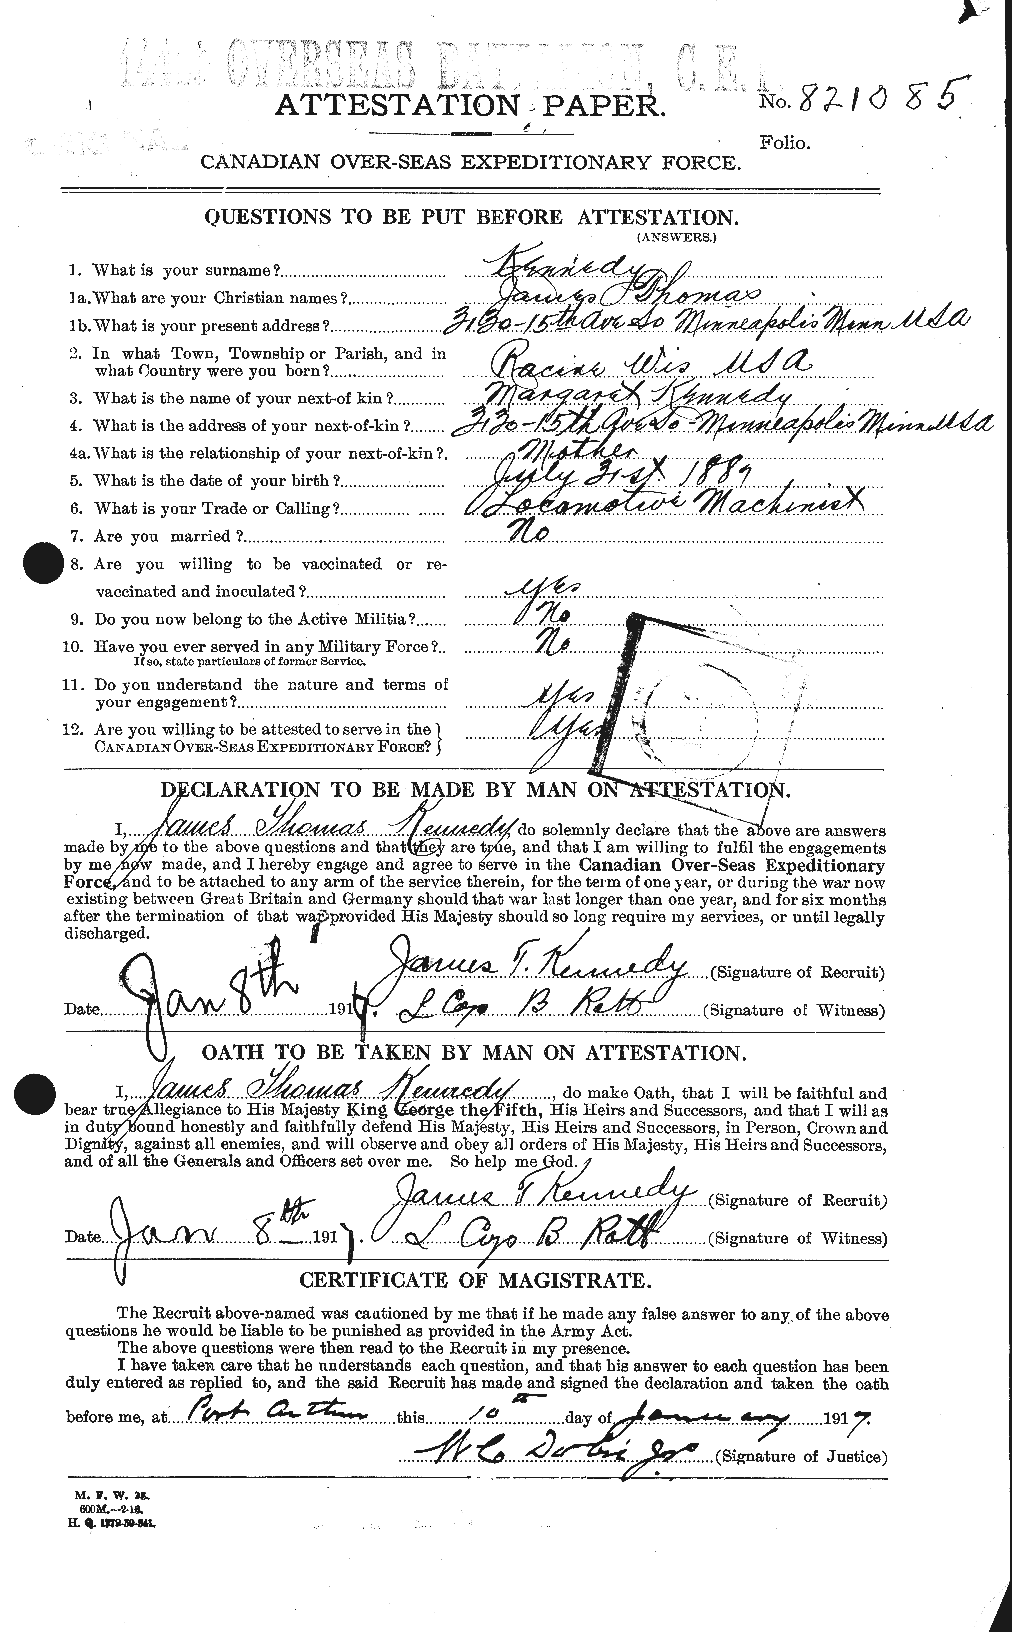 Personnel Records of the First World War - CEF 430899a